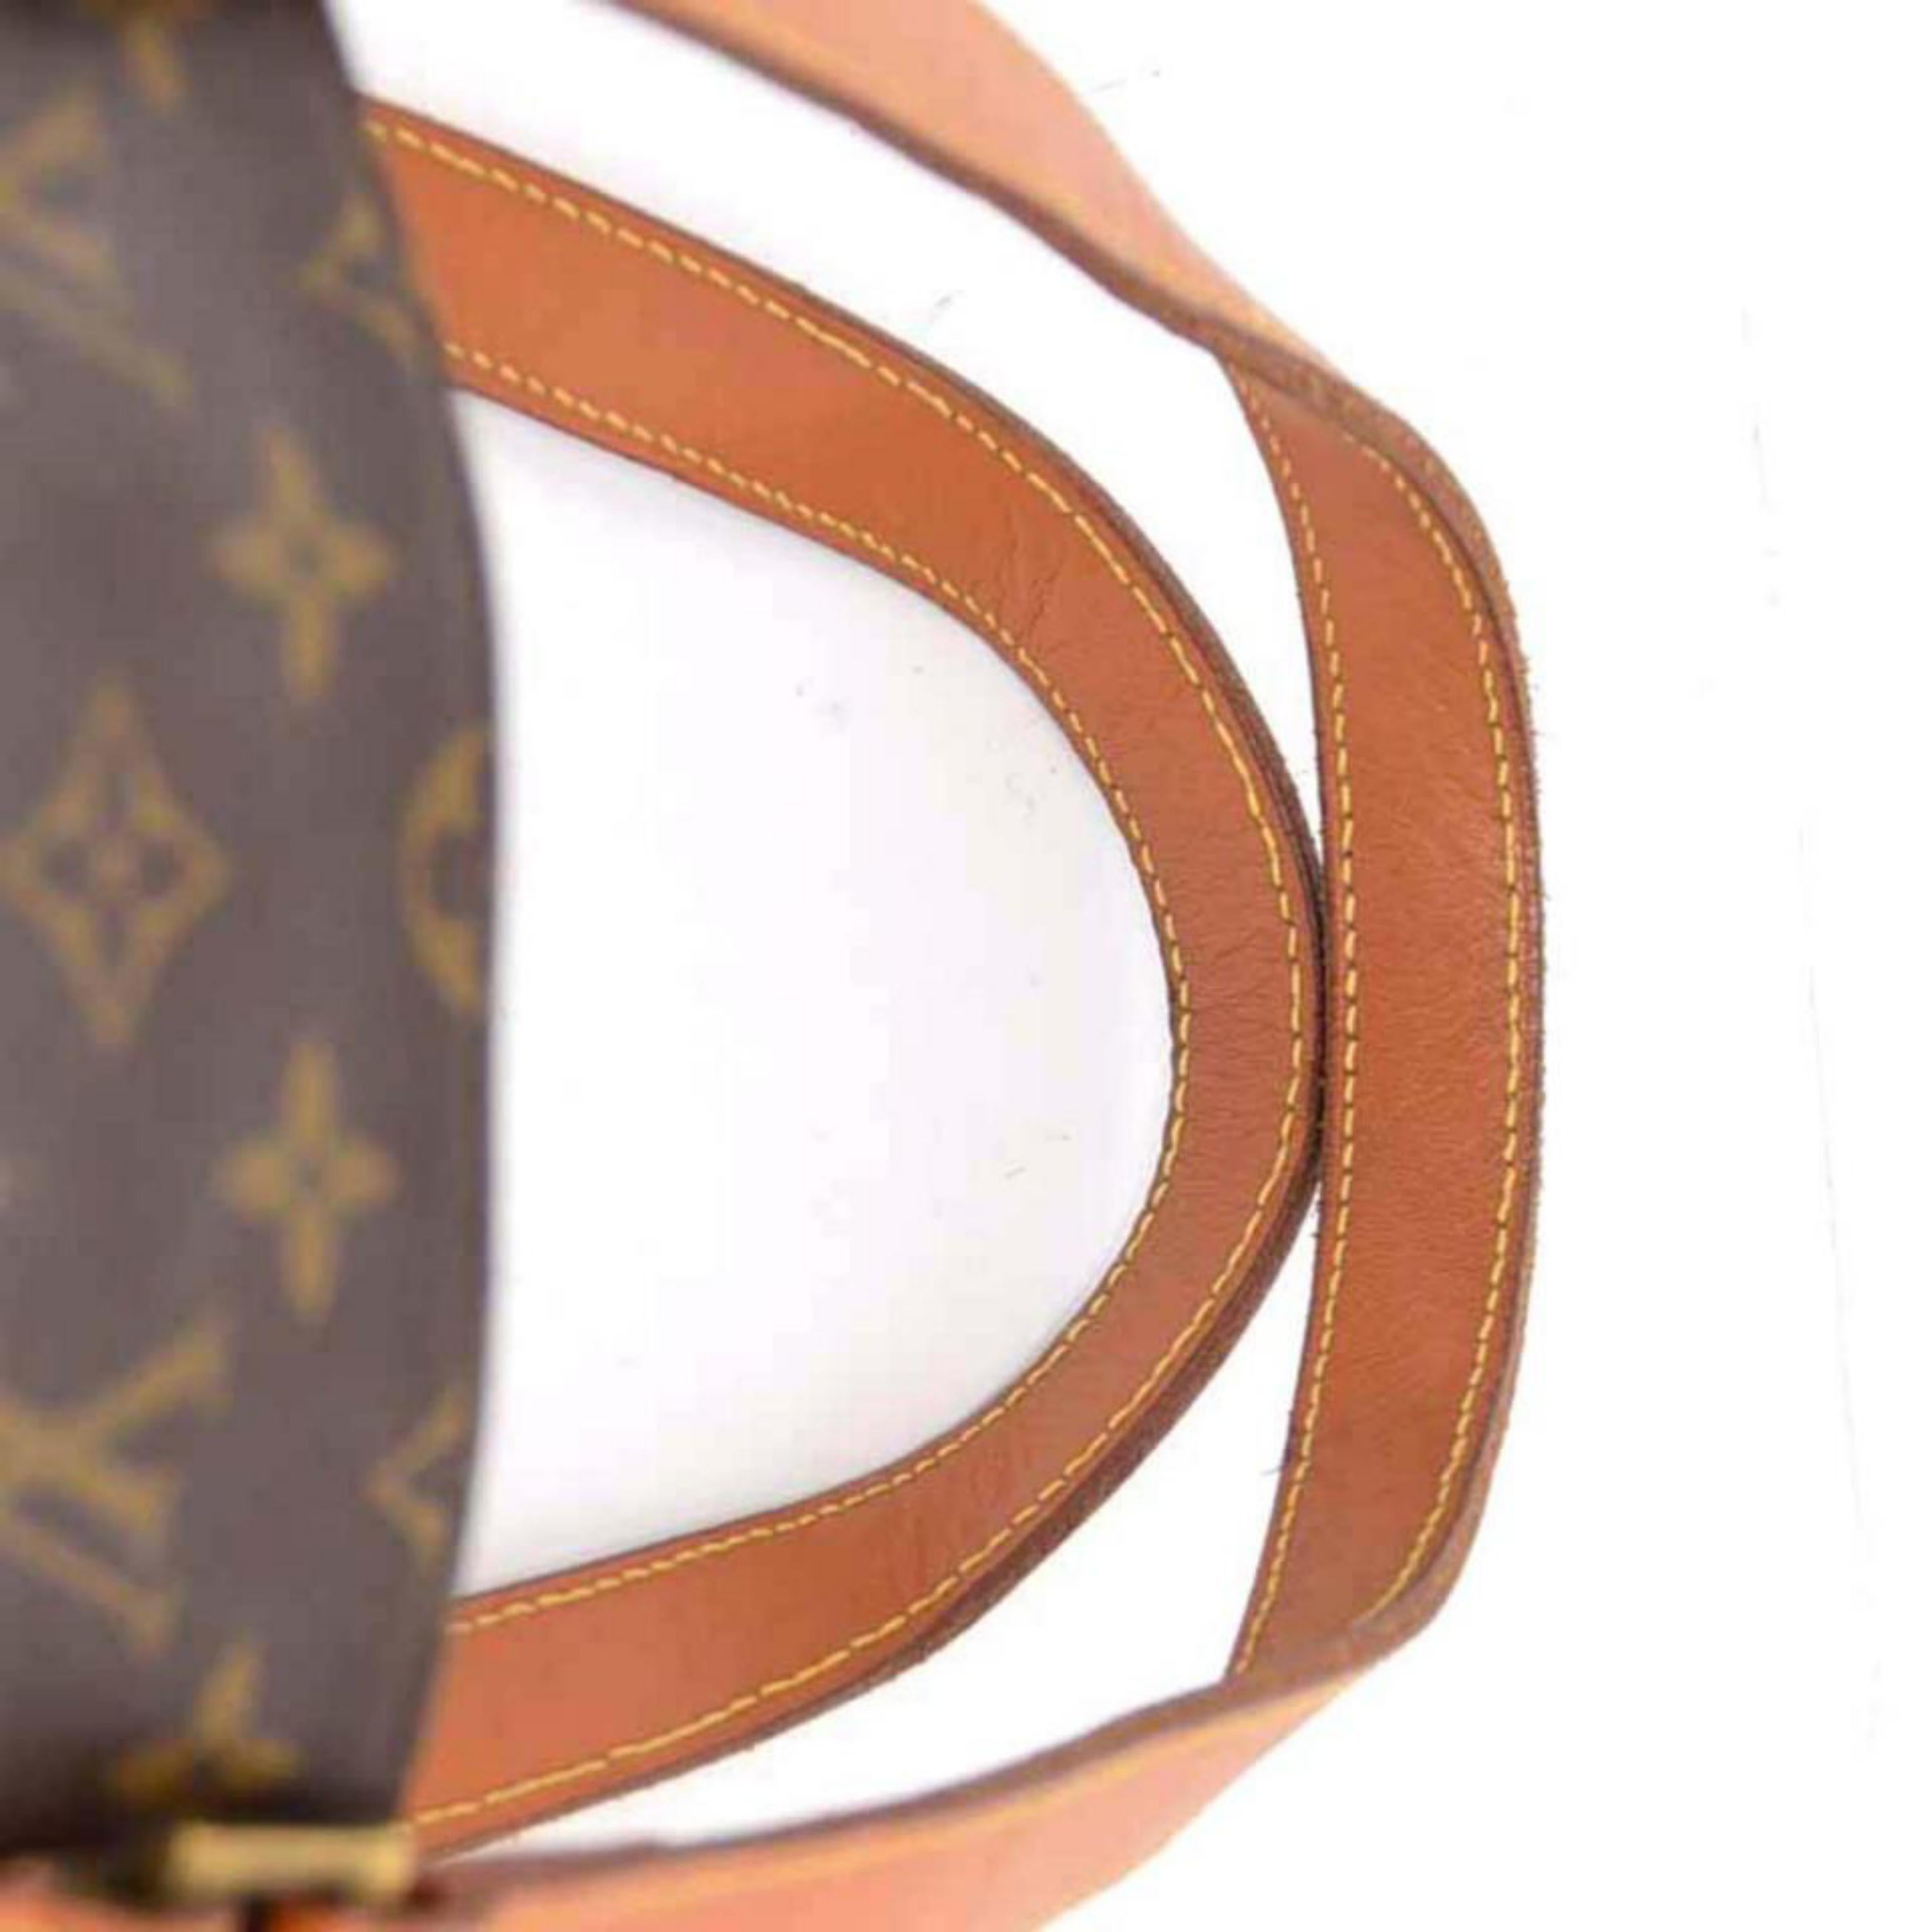 Louis Vuitton Vavin Monogram Gm 226719 Brown Coated Canvas Tote In Excellent Condition For Sale In Forest Hills, NY